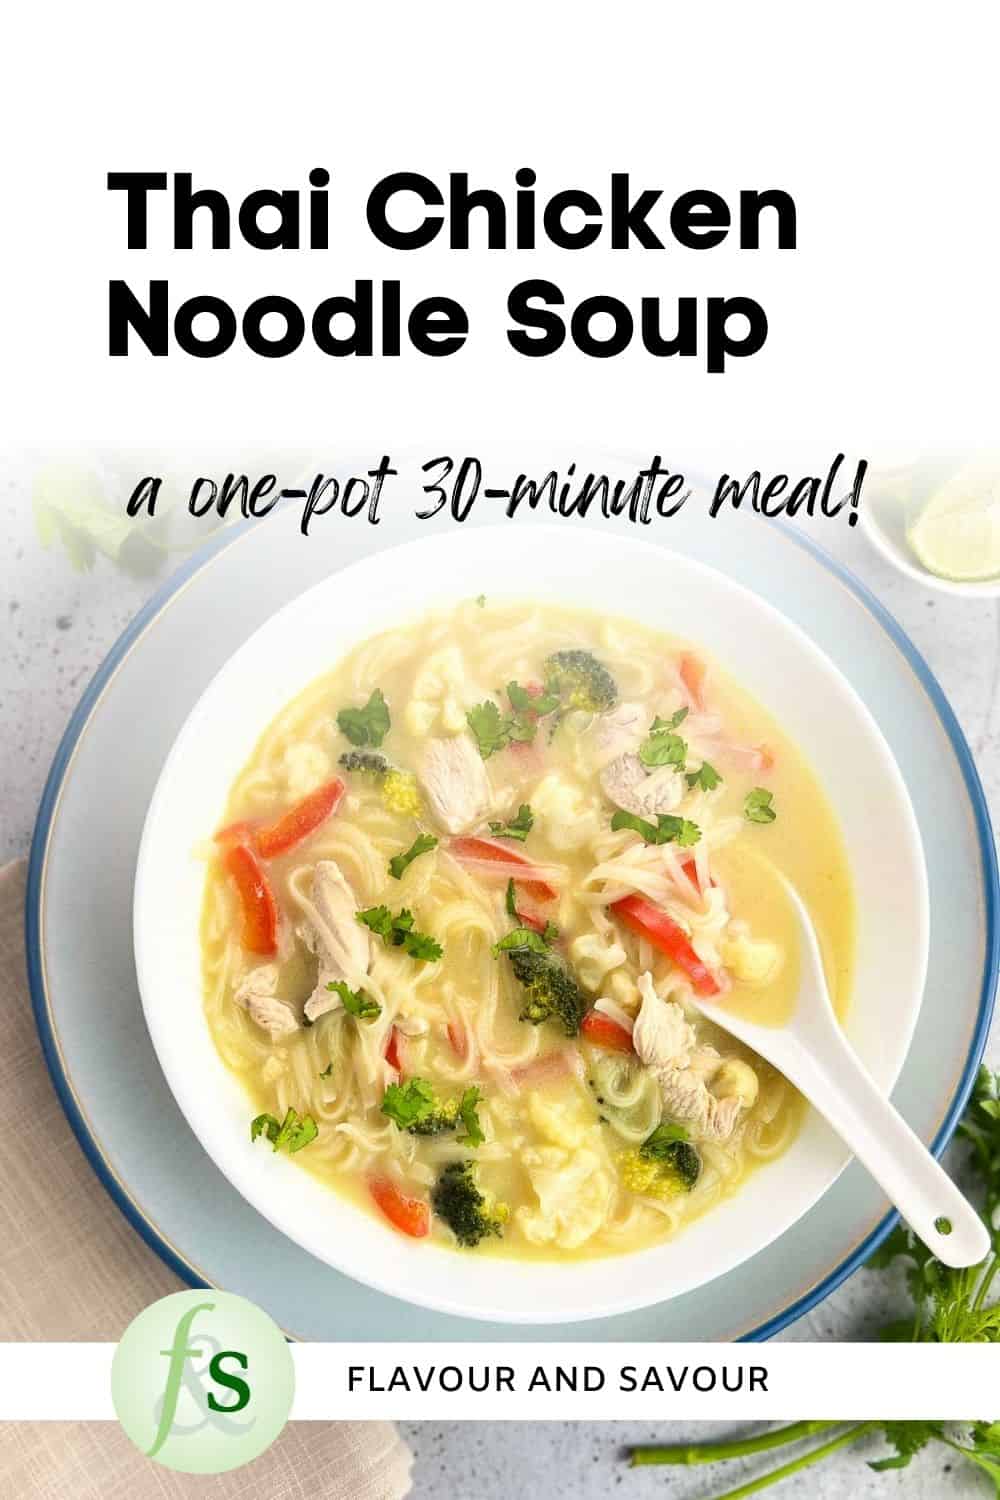 Image with text overlay for Thai Chicken Noodle Soup.